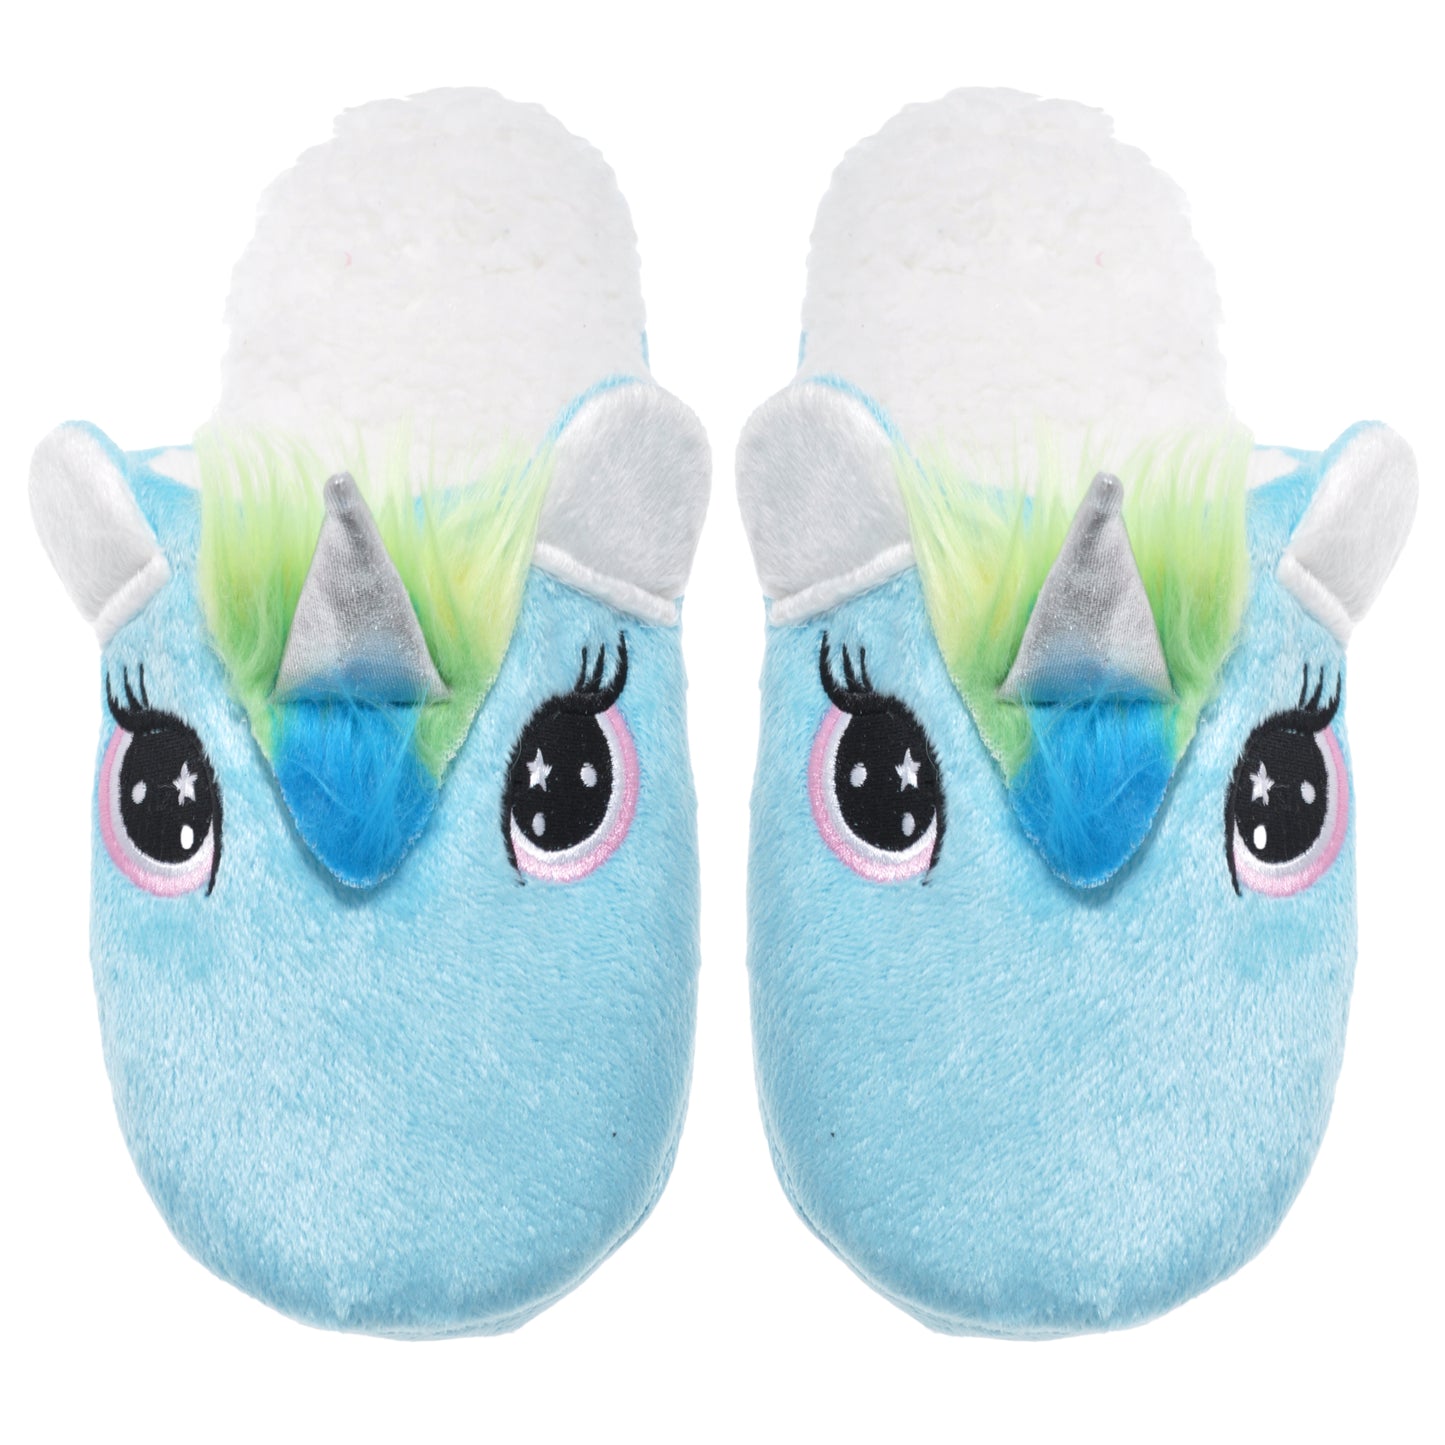 Cozy Unicorn Slippers with Sherpa-Lined Interior (1-Pack)